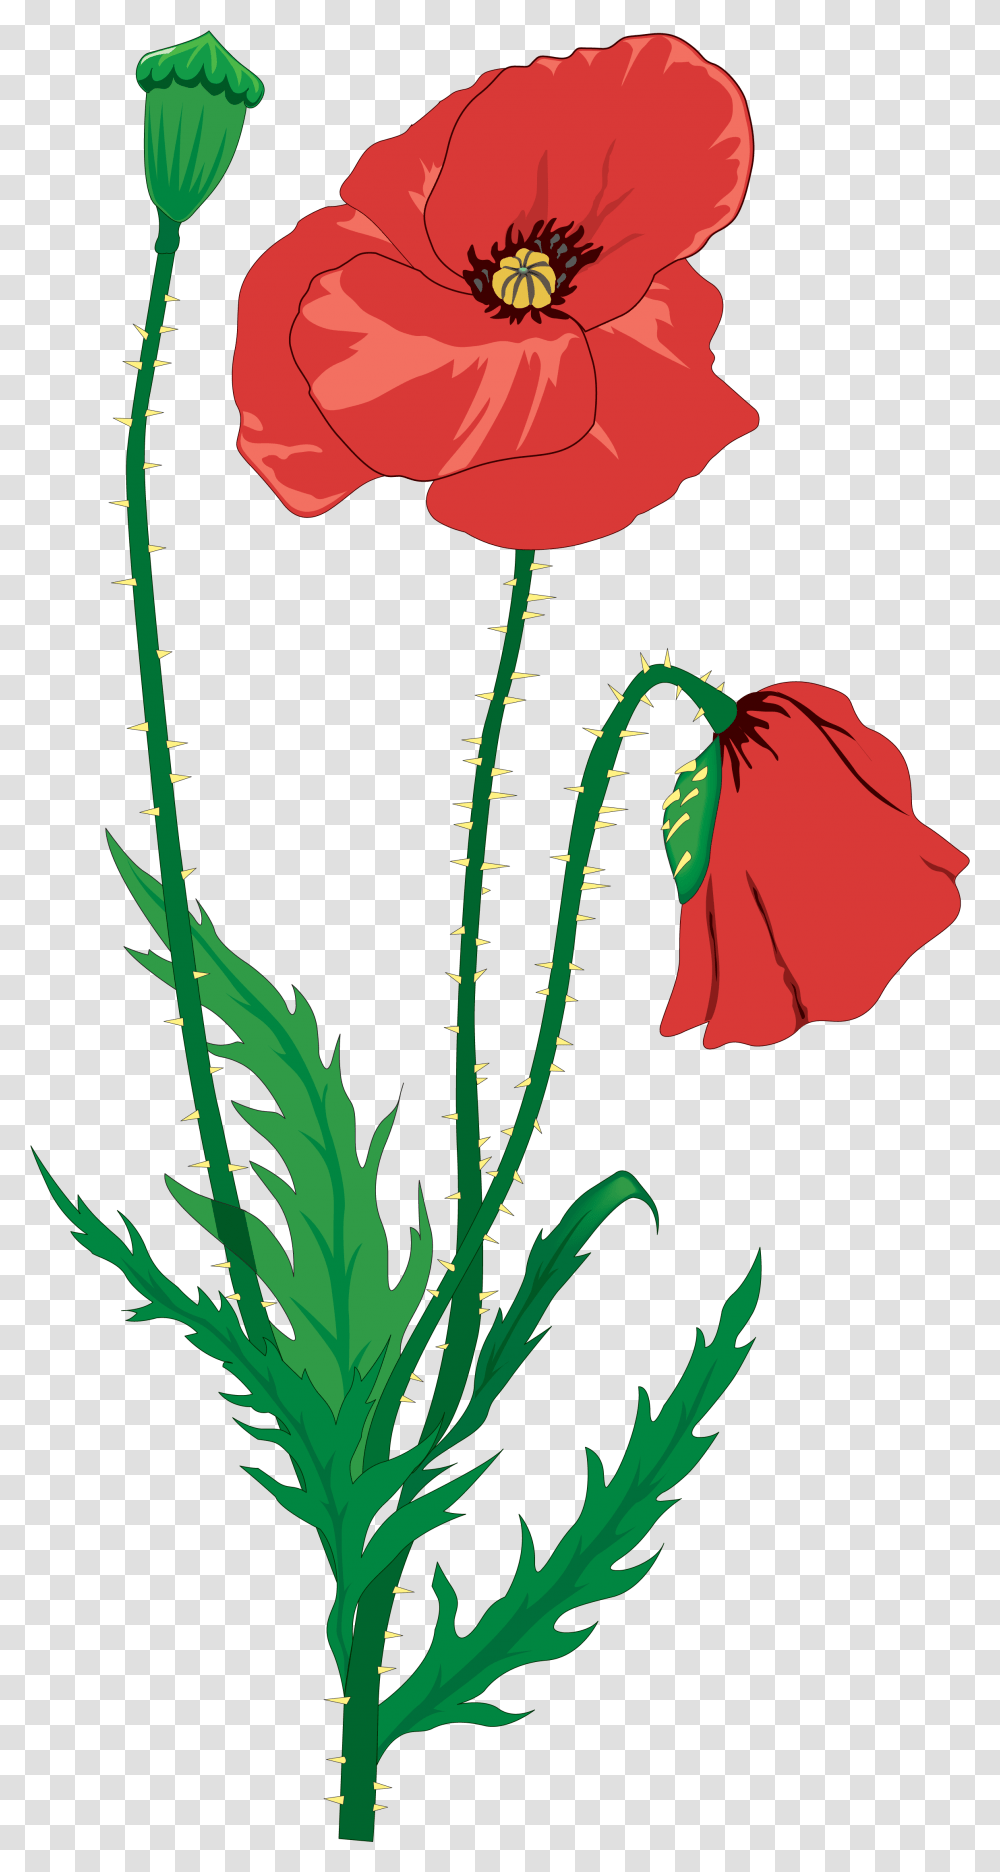 Drawing Flower Clip Art Memorial Day And Poppies Poppies Poem Ww1, Plant, Blossom, Geranium, Petal Transparent Png